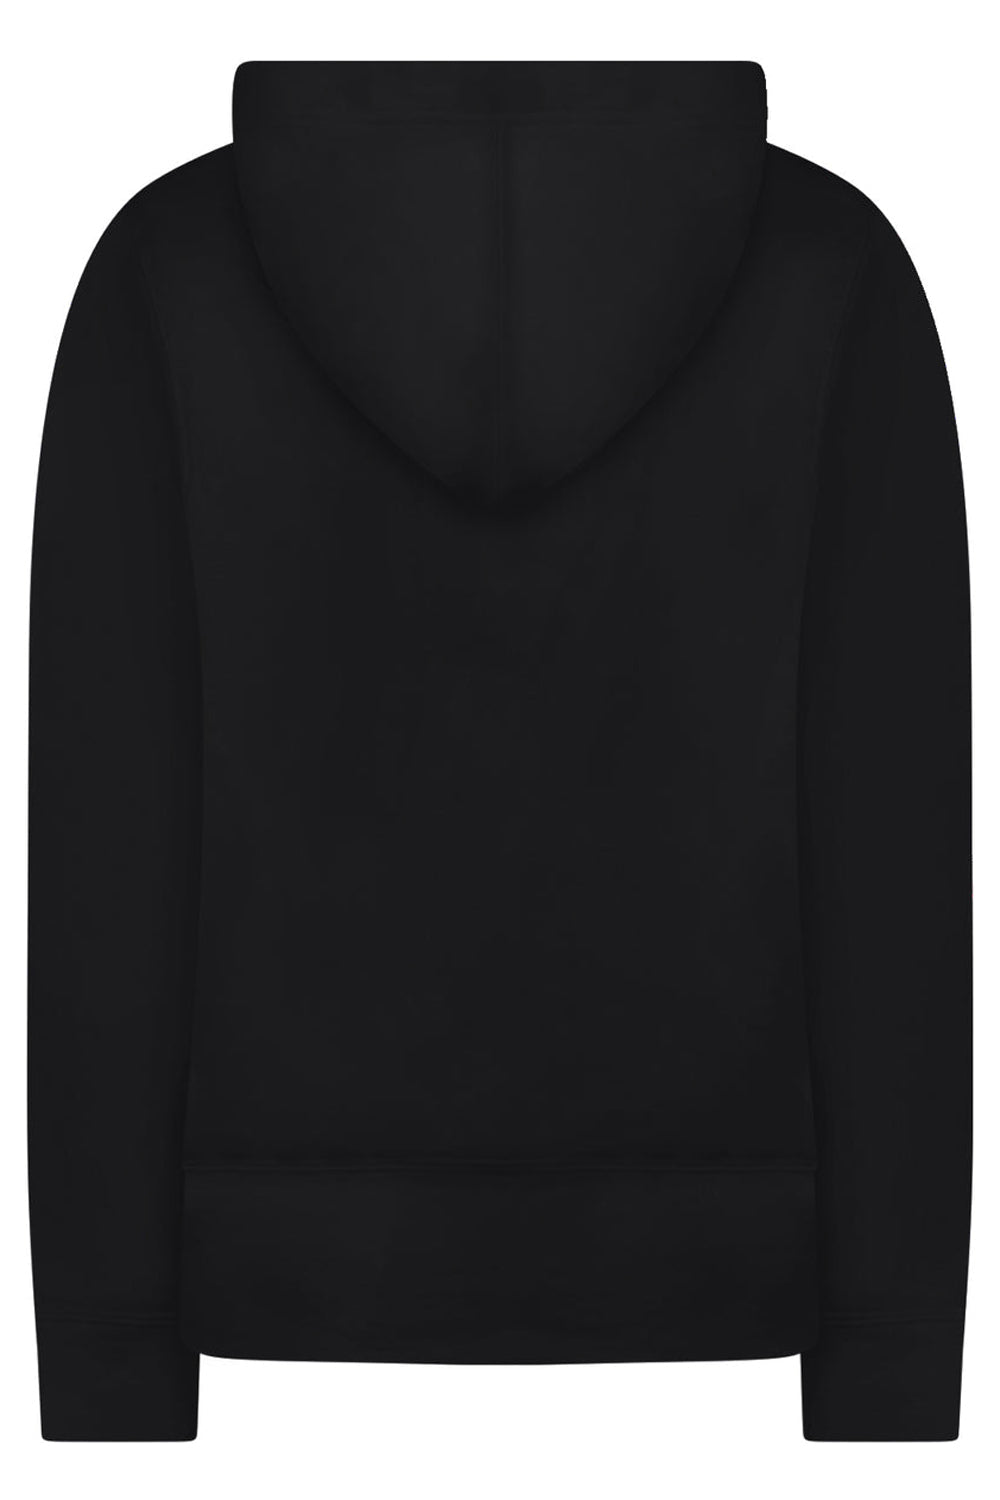 COMME DES GARCONS PLAY RTW PLAY MENS DOUBLE HEART ZIP HOODY | BLACK/RED HEARTS